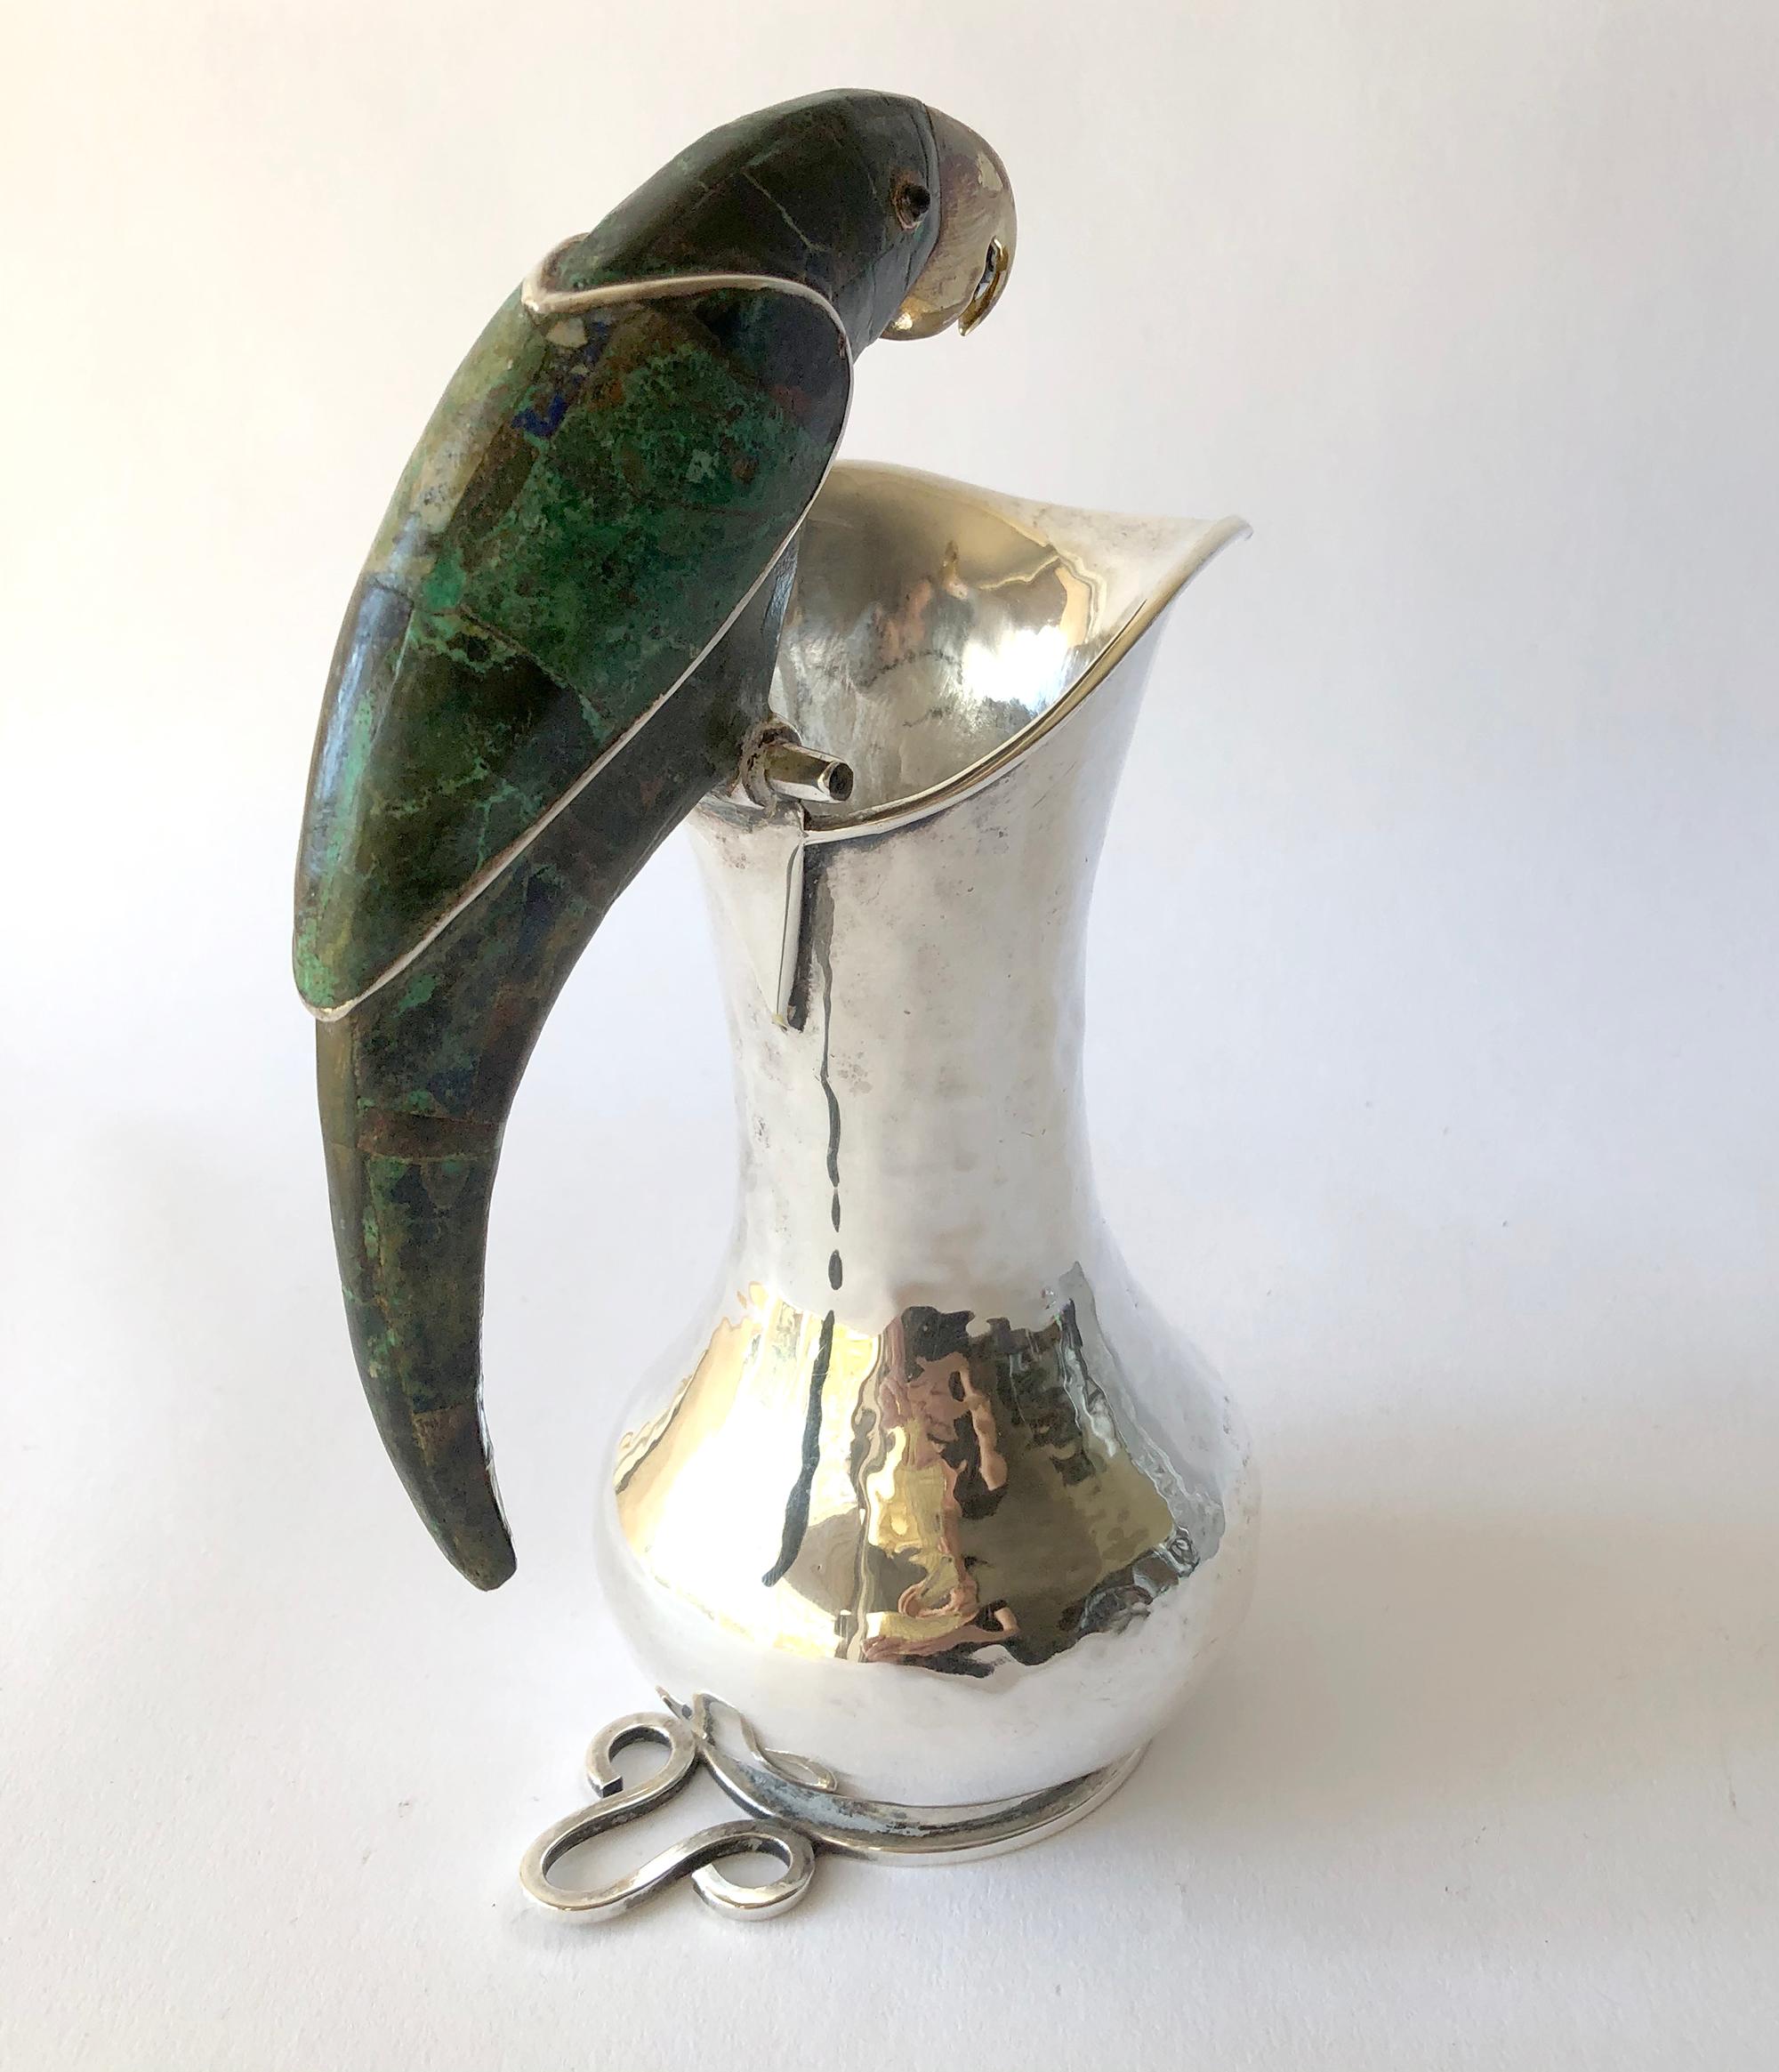 Hammered silver plate pitcher with azurite and malachite inlay parrot handle created by the Los Castillo workshop, Taxco, Mexico circa 1960s. Pitcher measures 7.5